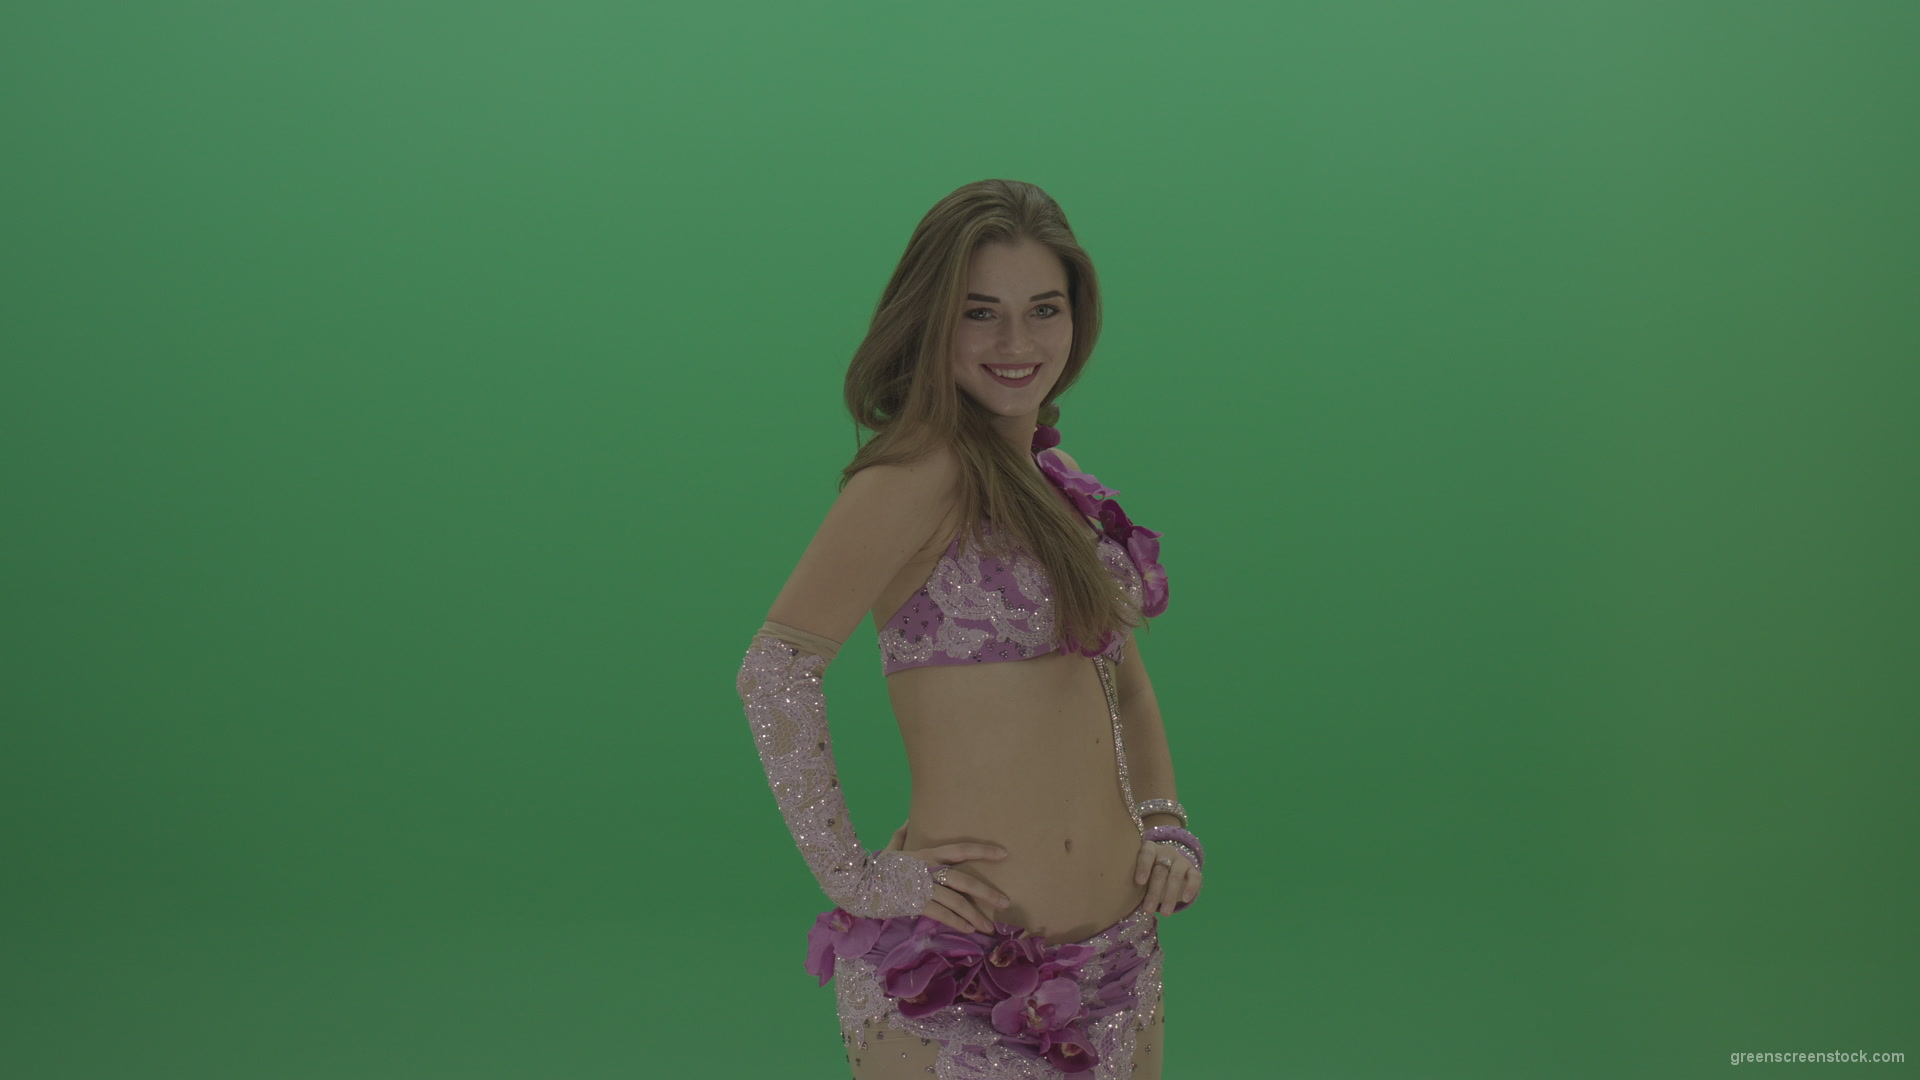 vj video background Beautiful-belly-dancer-in-purple-wear-winks-as-she-poses-over-green-screen-background_003